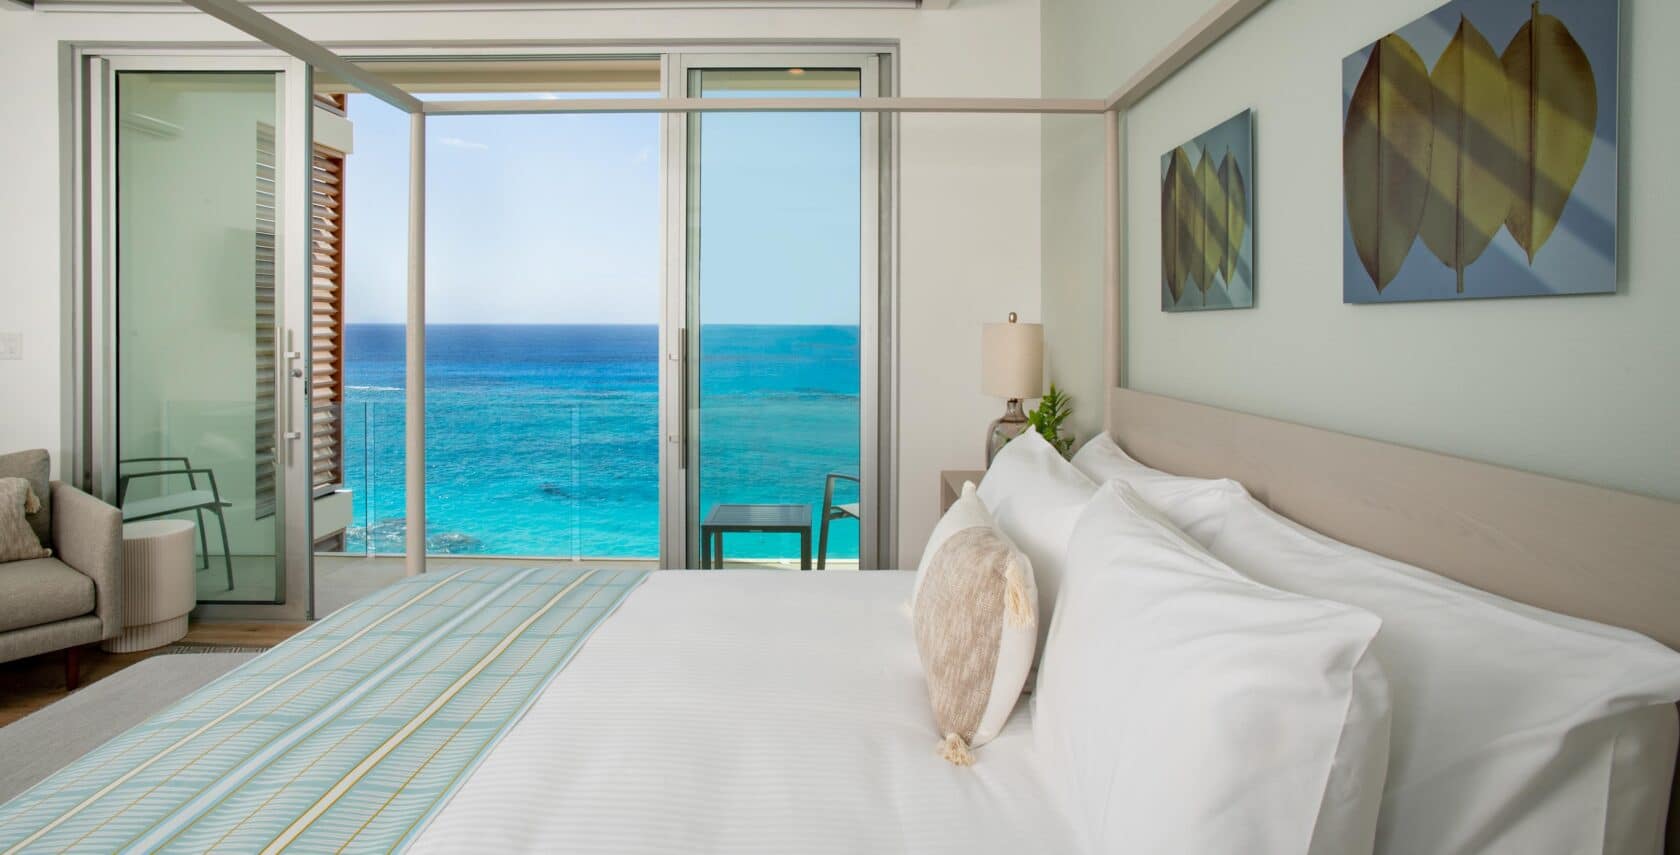 A bedroom with large glass doors with an oceanfront view.